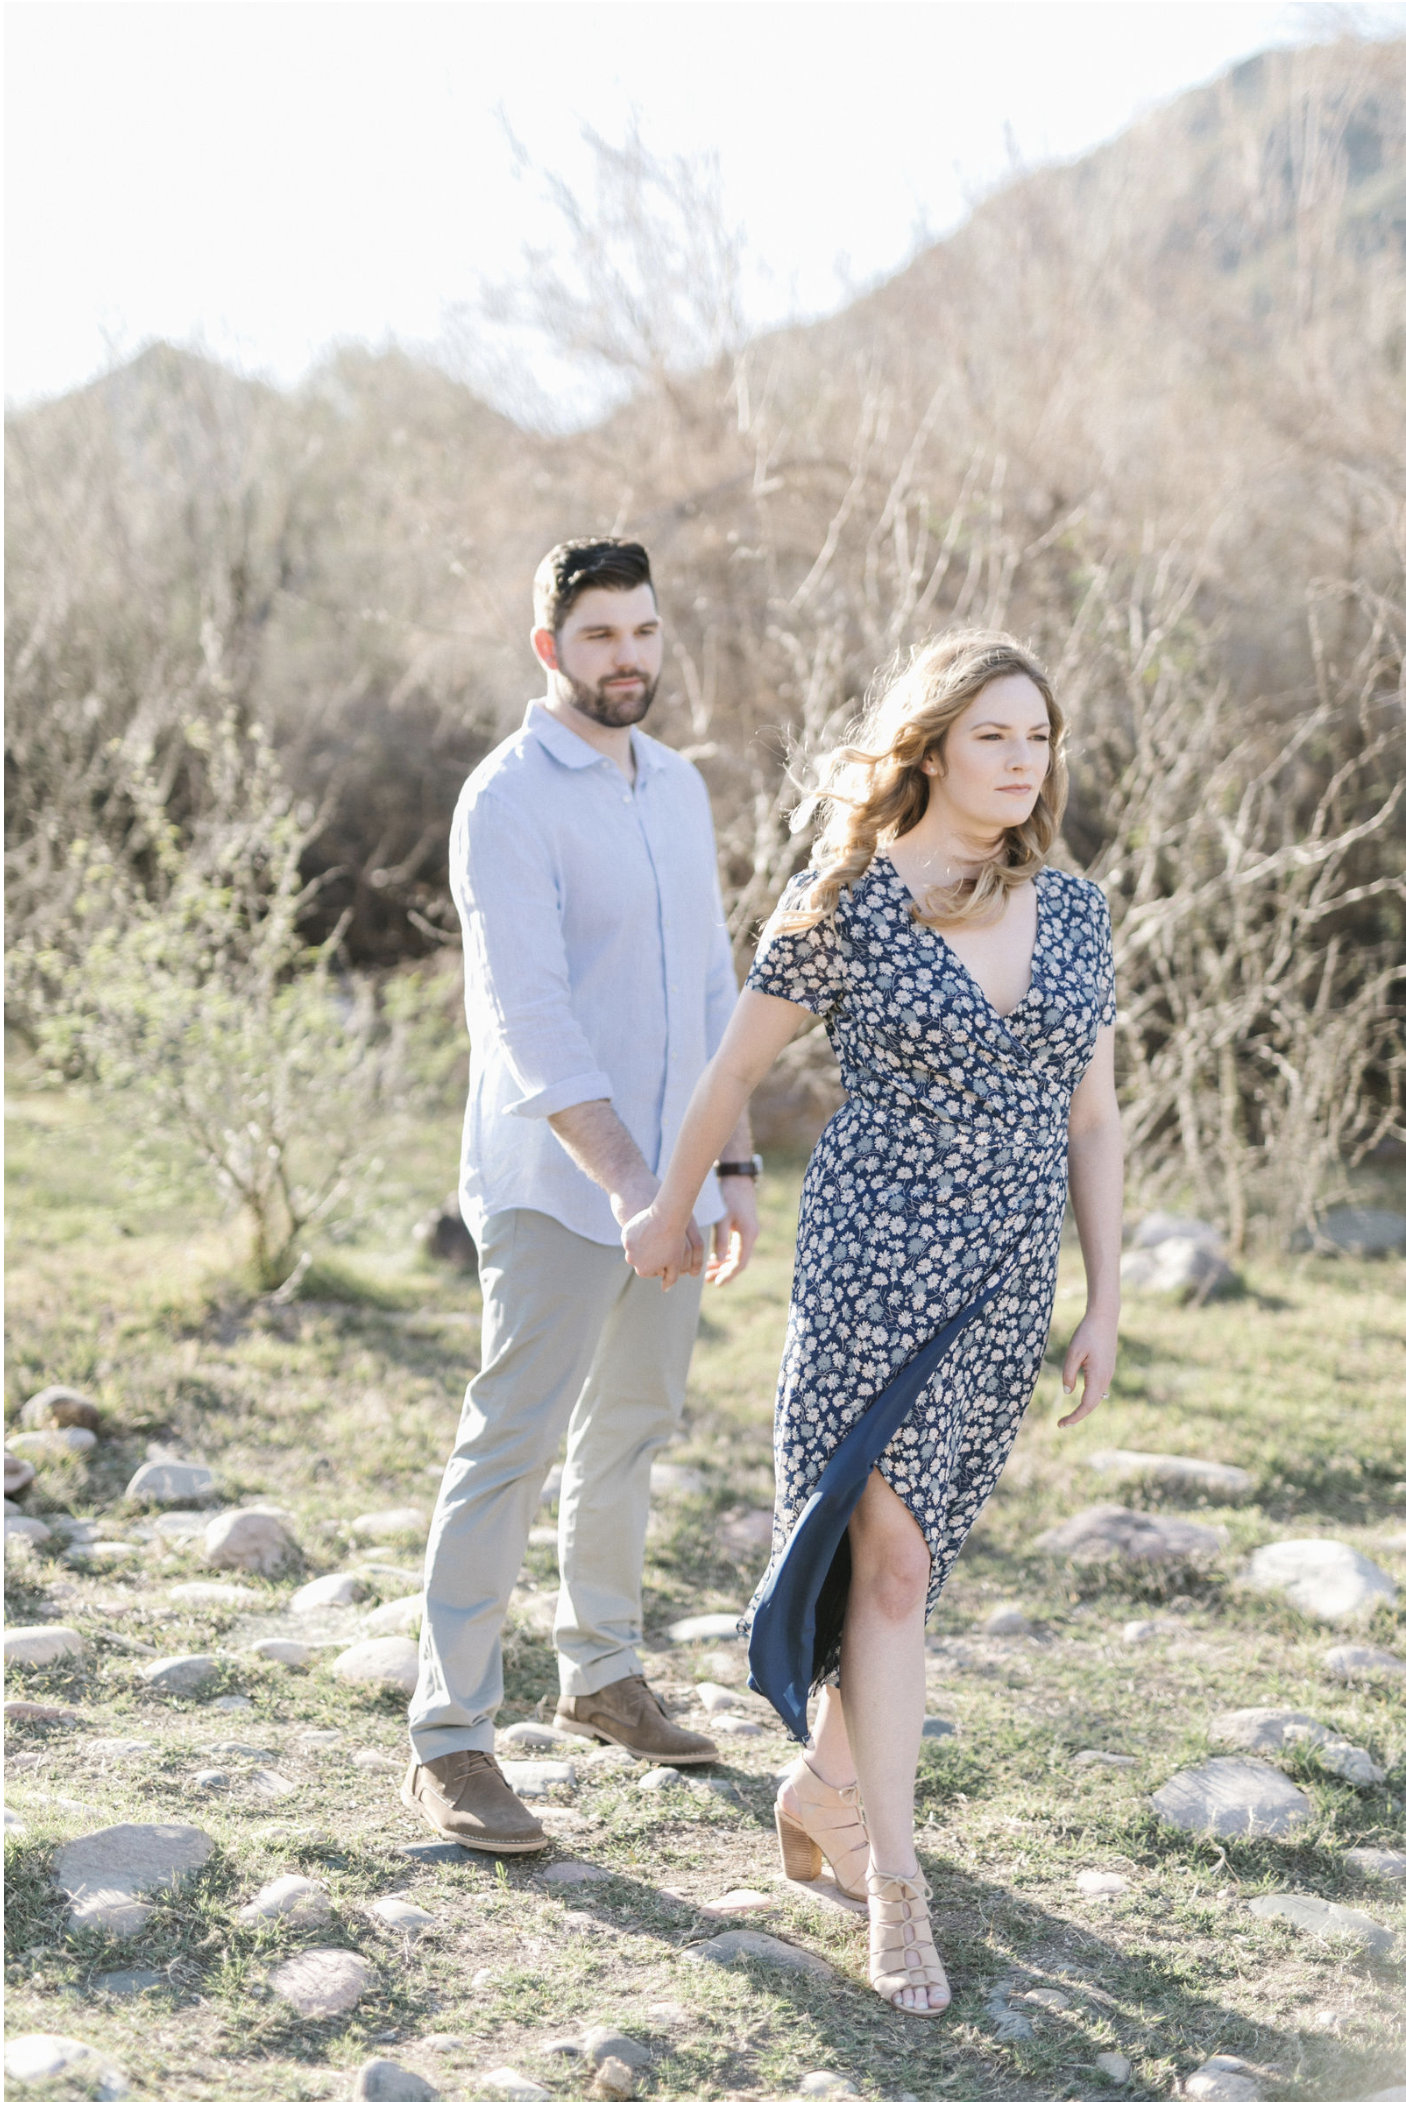 A beautiful engagement shoot on the Salt River in the Arizona desert. Enjoy it on the blog now! #EngagementPhotographyIdeas #ArizonaWeddingPhotography #TheSaltRiverInArizona #TheArizonaDesert #EngagementPortraitIdeas